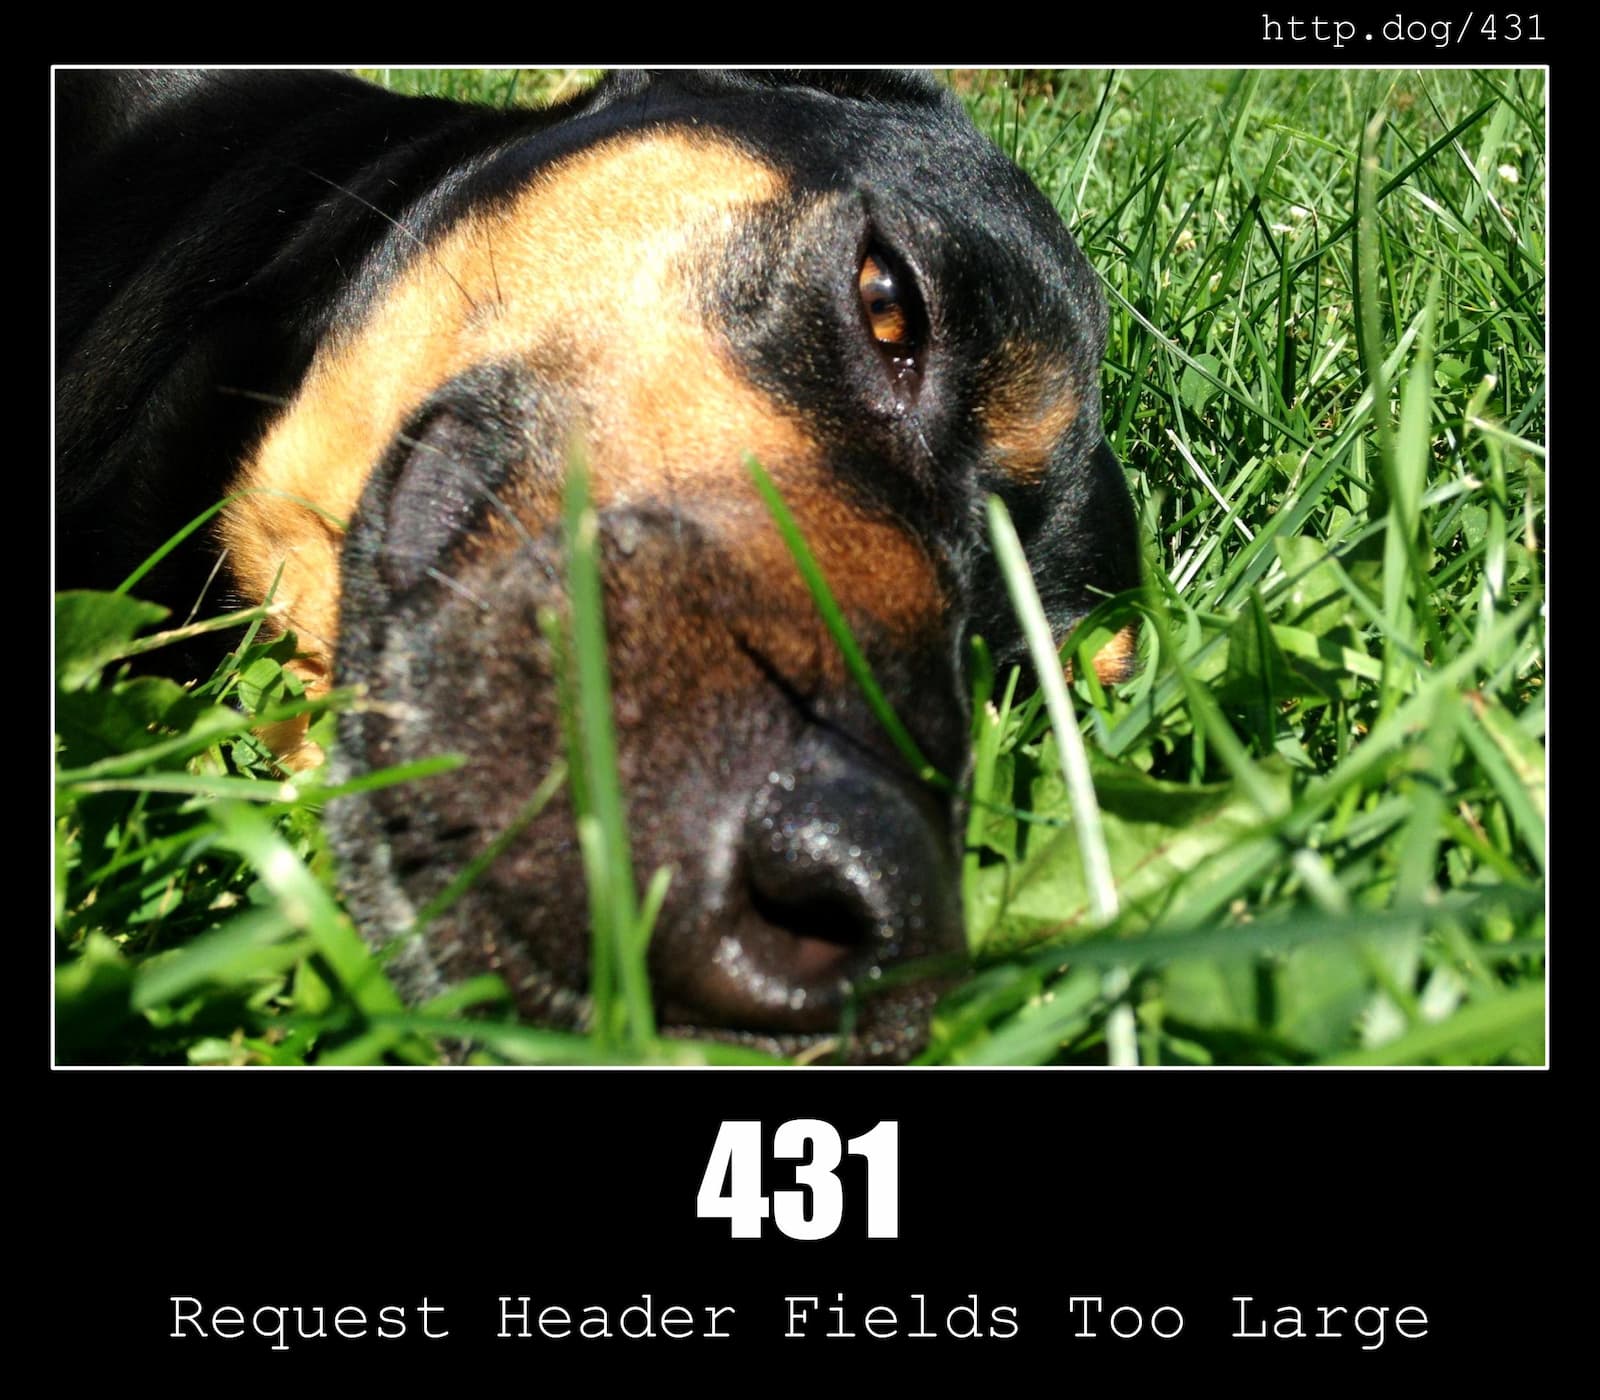 HTTP Status Code 431 Request Header Fields Too Large & Dogs